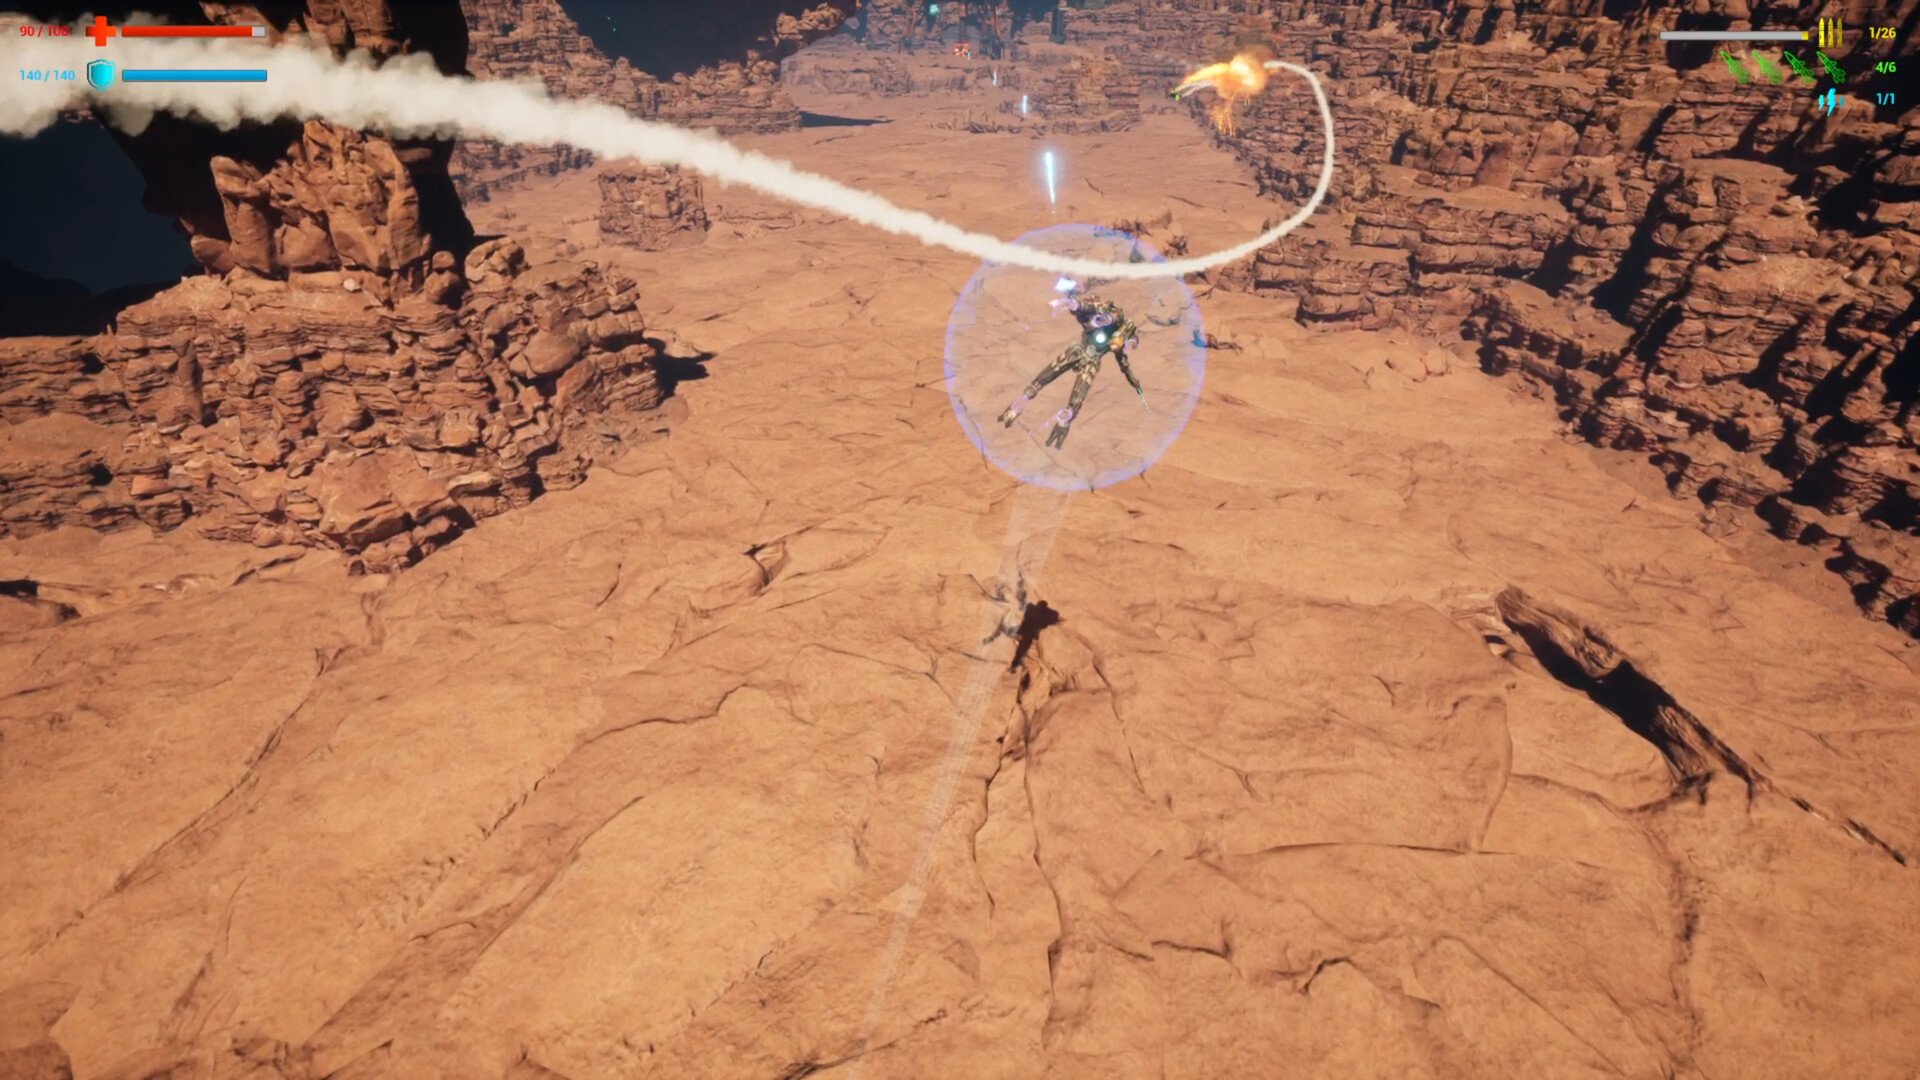 Smoke of a projectile launched towards the enemy. Image is from game Vector Bias.